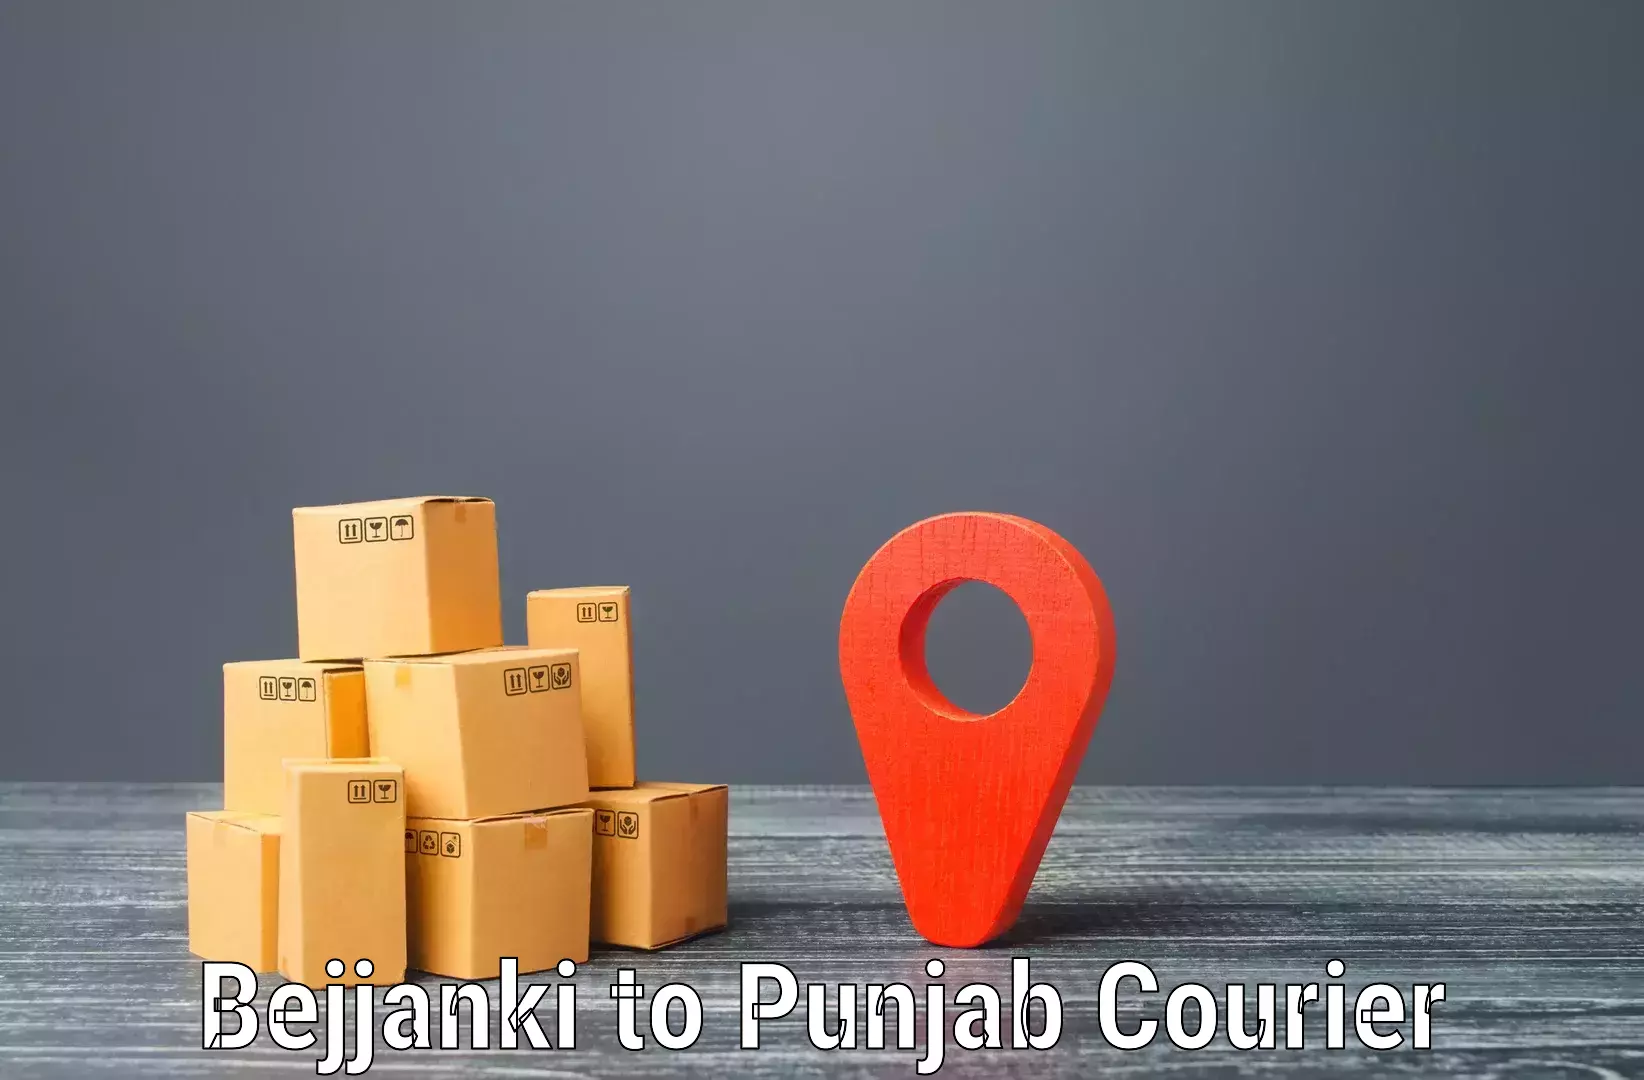 Postal and courier services Bejjanki to Ludhiana